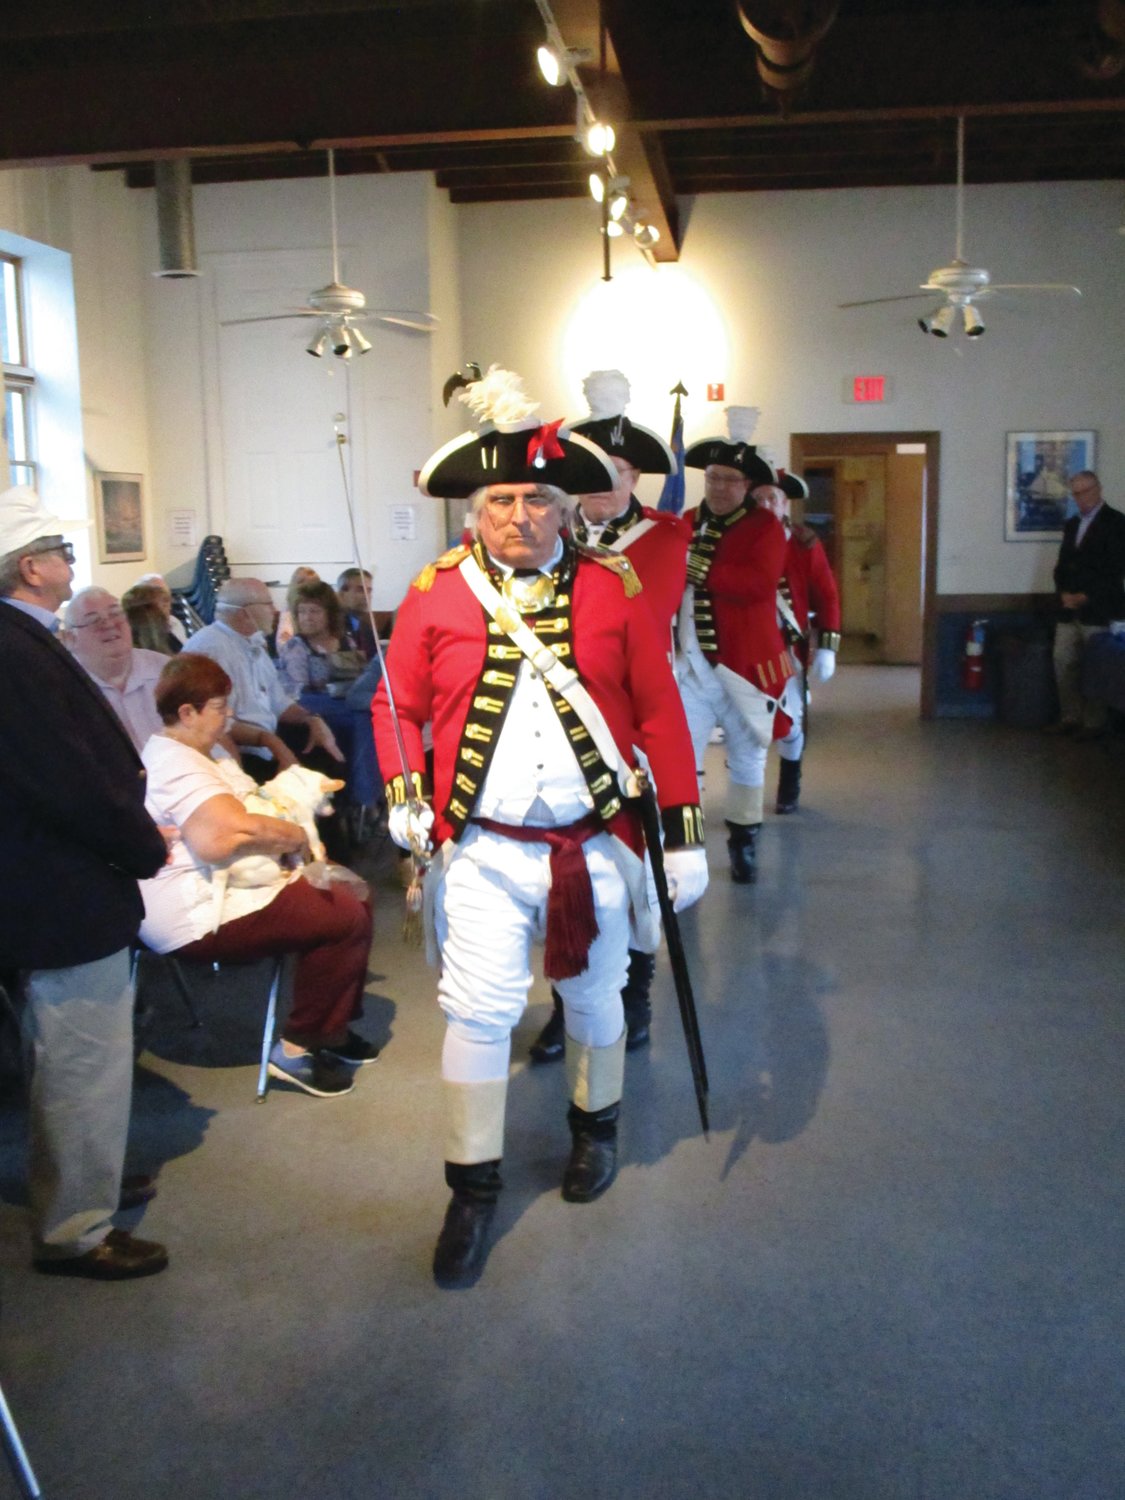 MAKING AN ENTRANCE: Members of the Pawtuxet Rangers led off last week’s ceremony, marching into the Aspray Boat House for a presentation of the colors